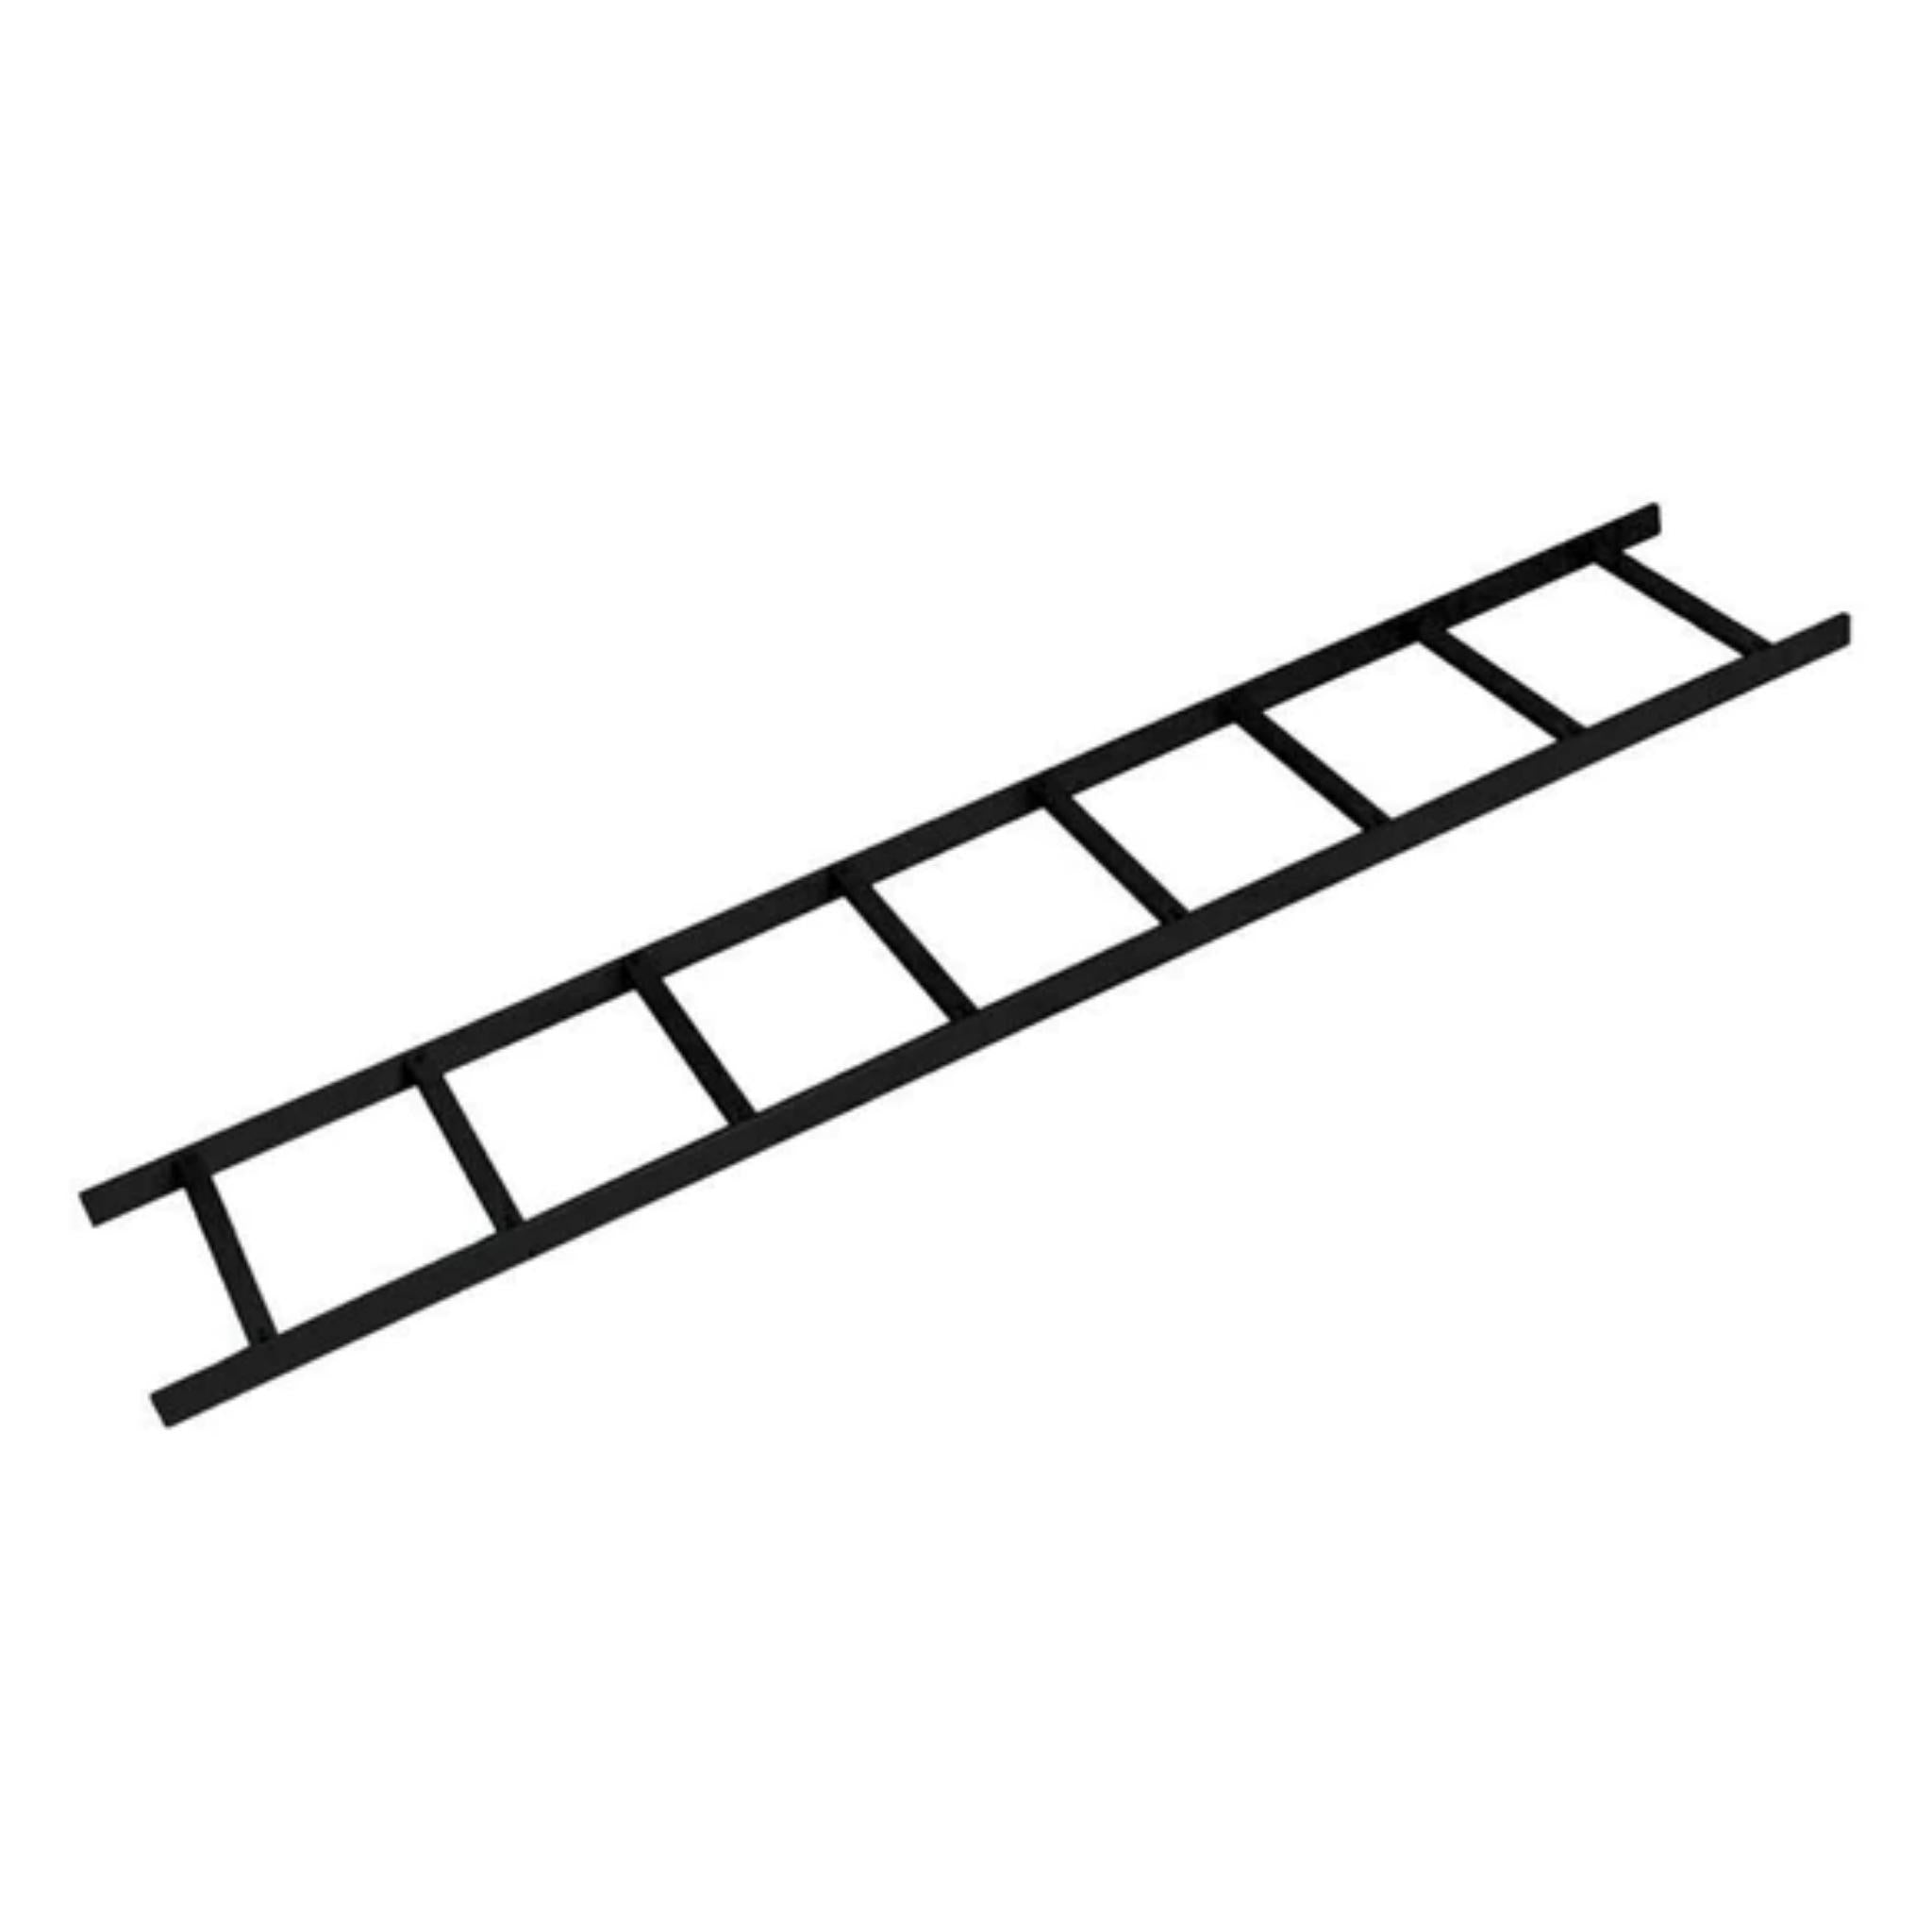 10FT LADDER RACK CABLE RUNWAY SECTION, 10FT (L) x 12" (W), BLACK